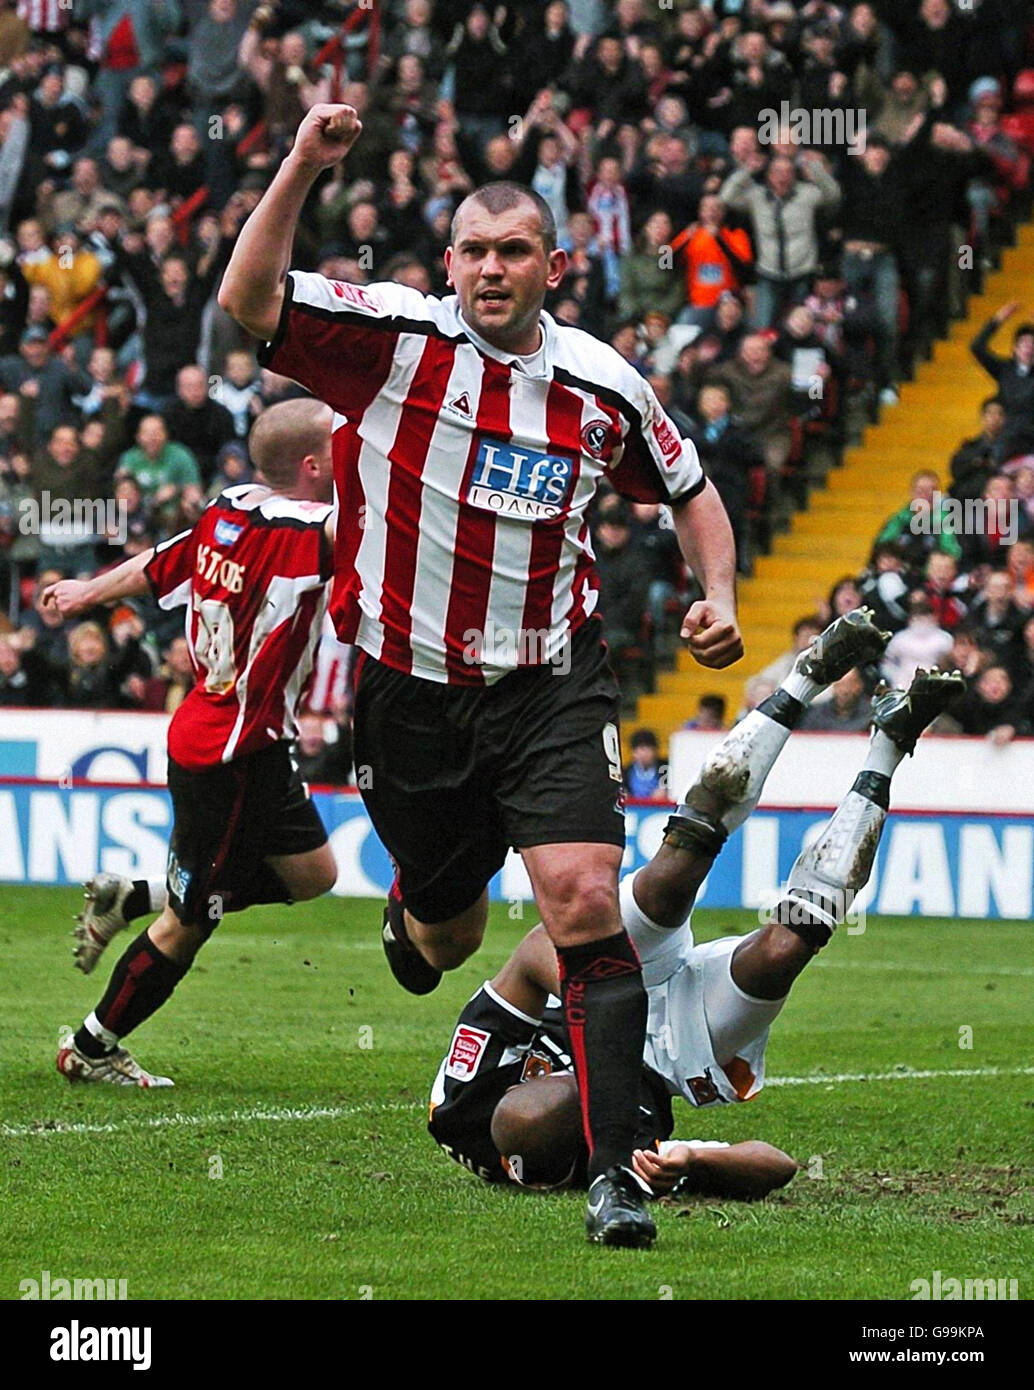 Sheffield United's Neil Shipperley celebrates scoring against Hull City during the Coca-Cola Championship match at Bramall Lane, Sheffield, Saturday April 8, 2006. Stock Photo